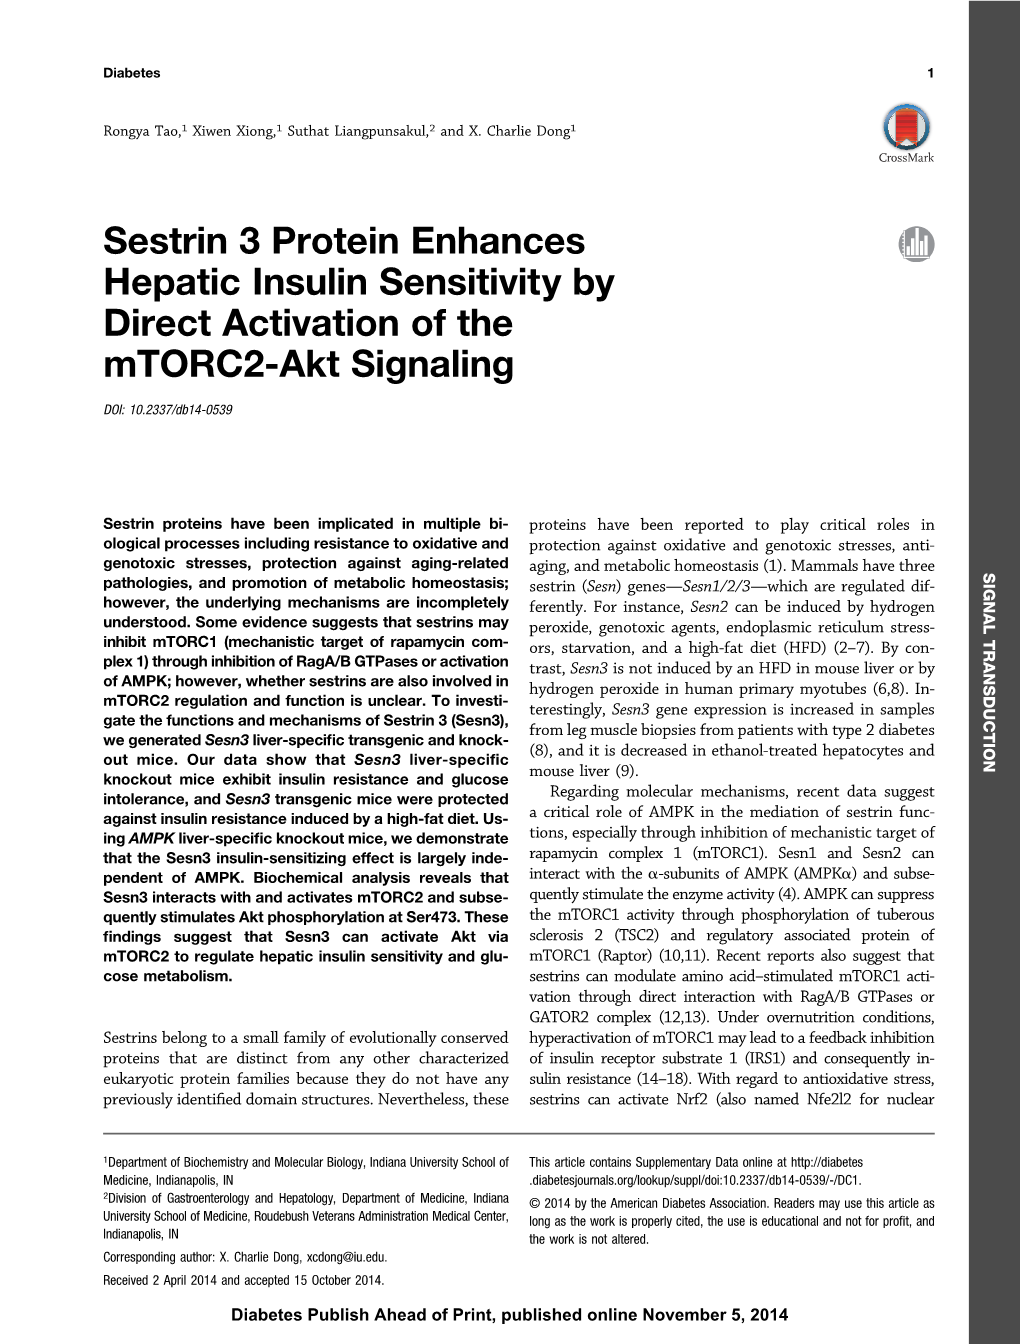 Sestrin 3 Protein Enhances Hepatic Insulin Sensitivity by Direct Activation of the Mtorc2-Akt Signaling